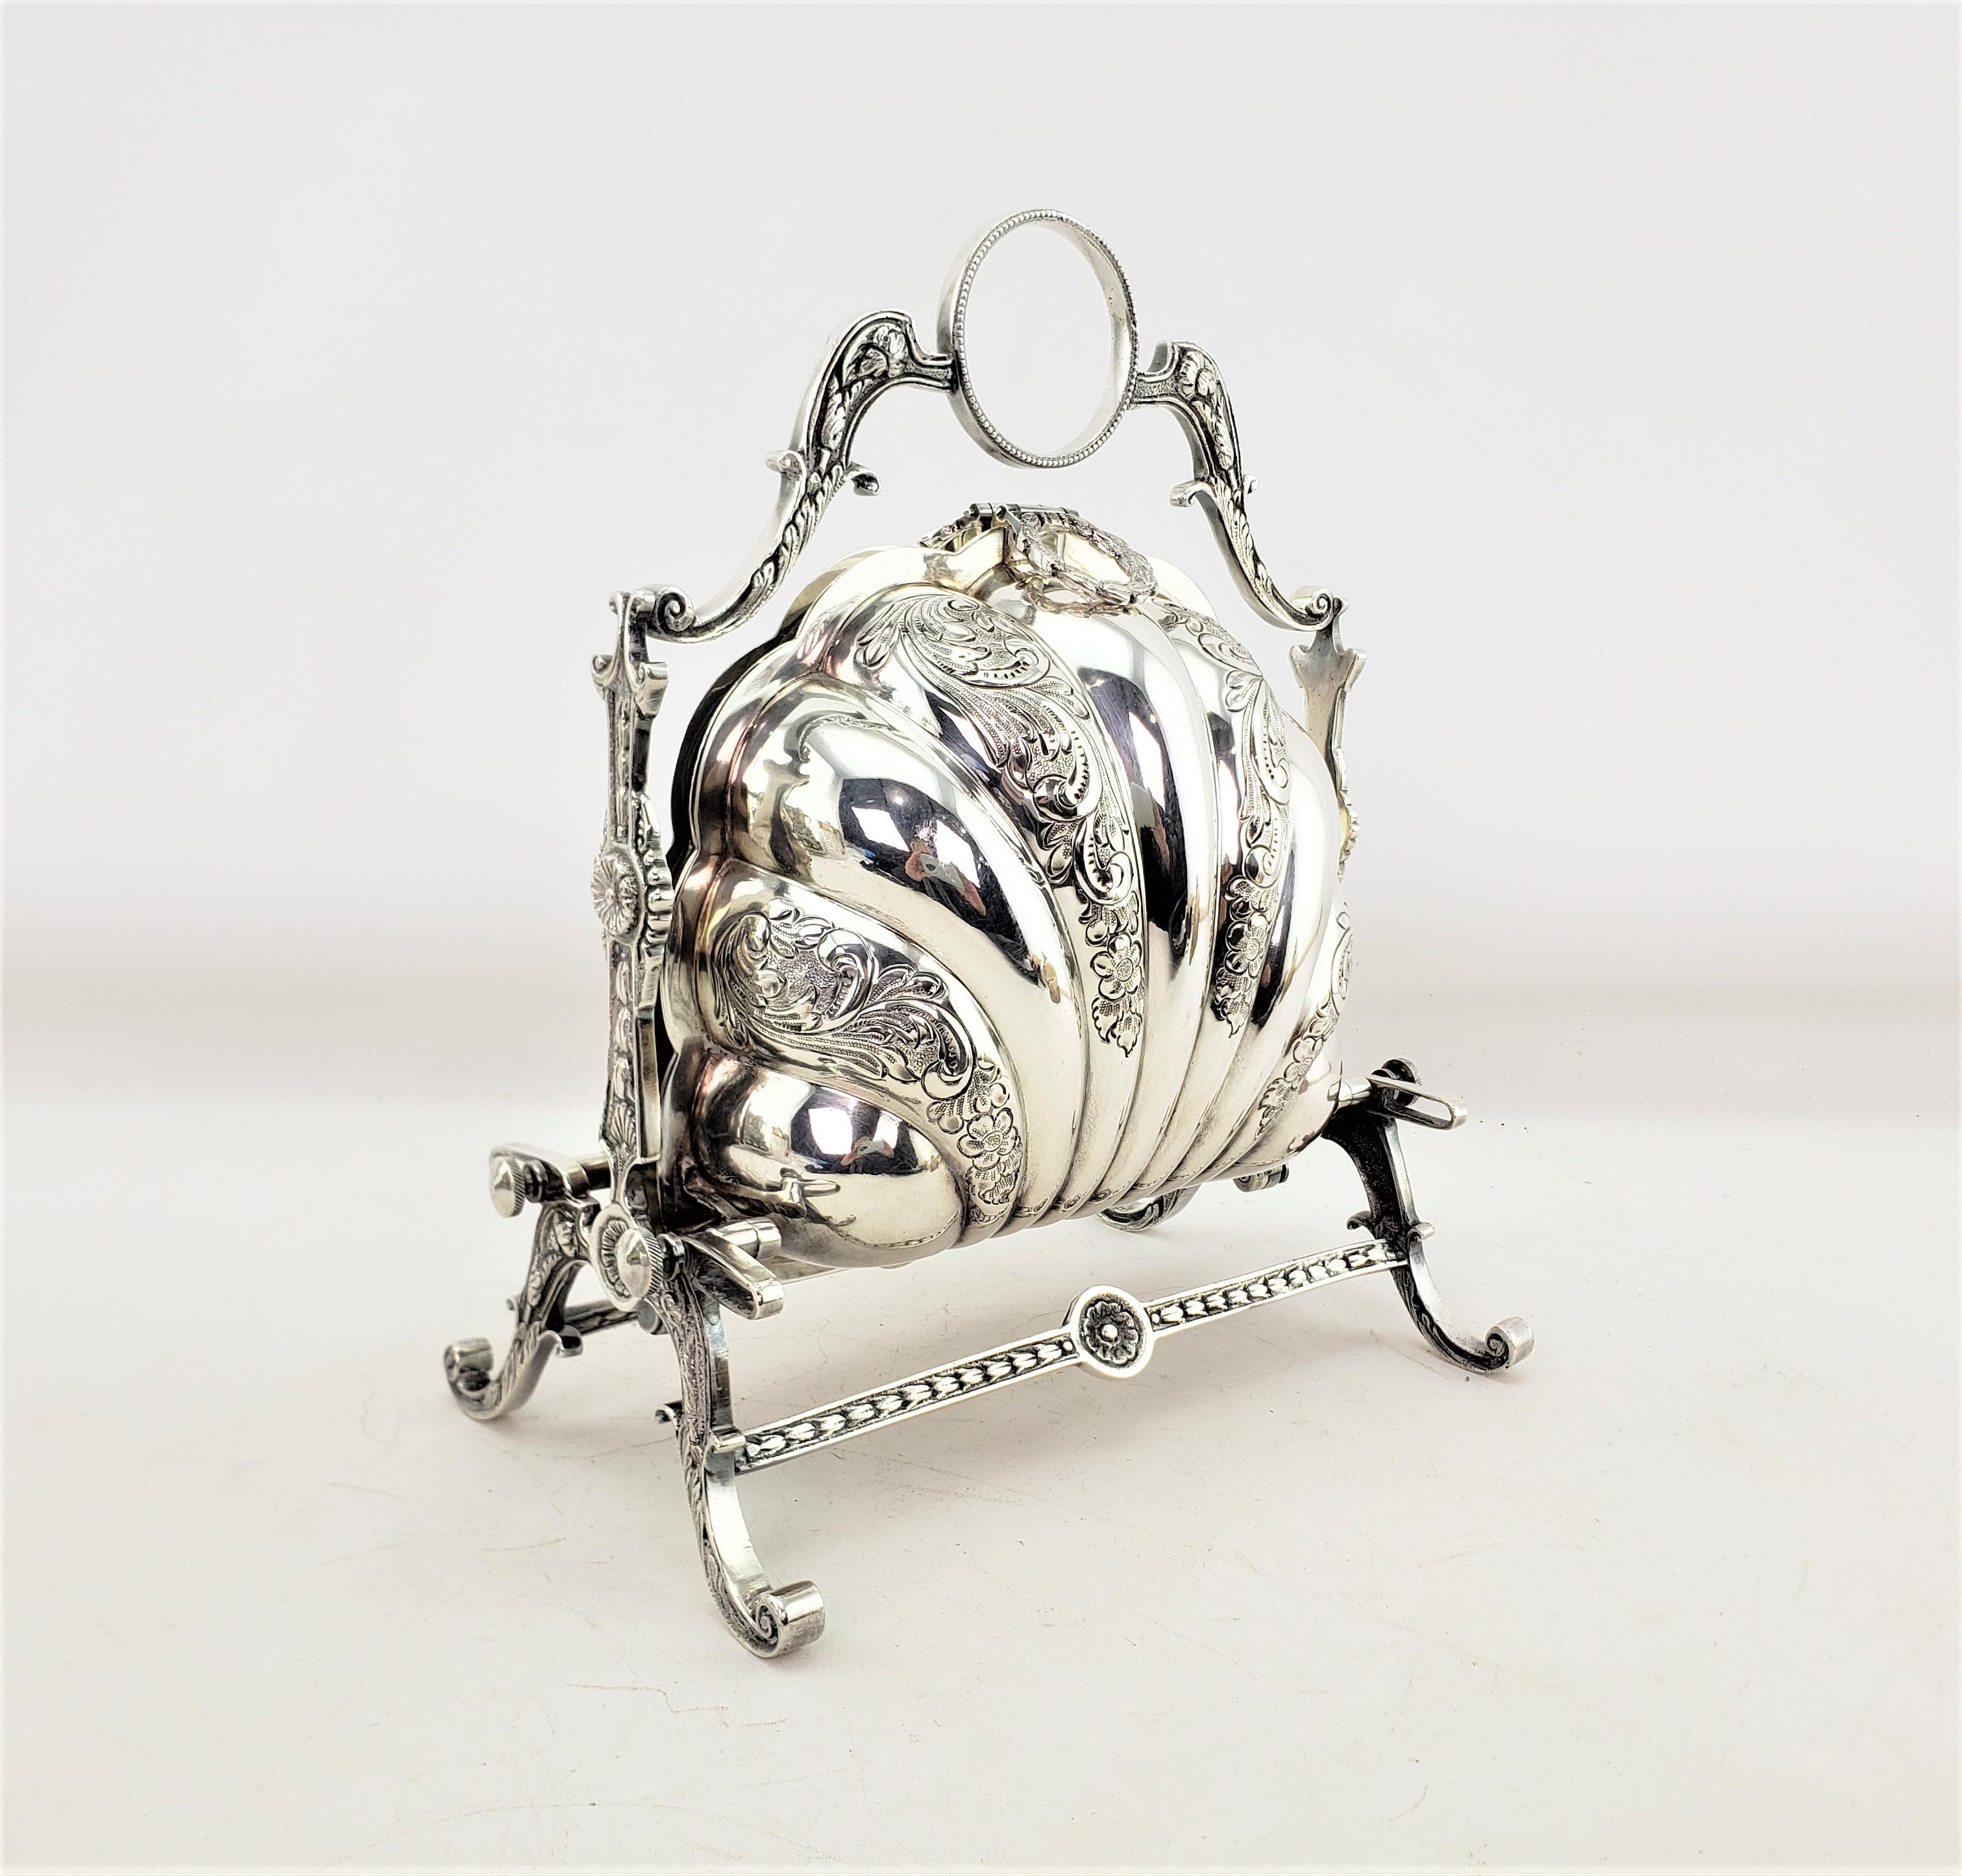 This antique biscuit barrel or box was made by the Reproduction Sheffield & Silver Plate firm of England and dates to approximately 1920 and done in a Victorian style. The server is composed of silver plate with a double shell folding sides with